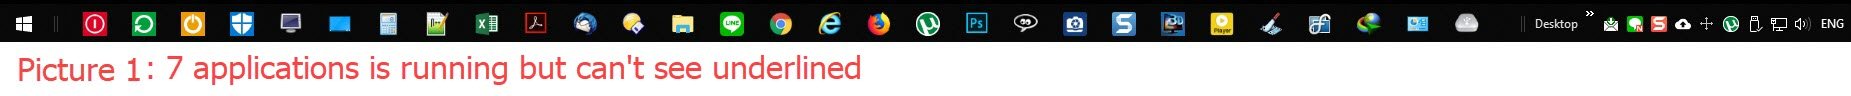 Underlined icon in the default taskbar size disappear (picture 1) and reappear 41987dfd-93bd-4ad5-a51d-c83022fefa4e?upload=true.jpg